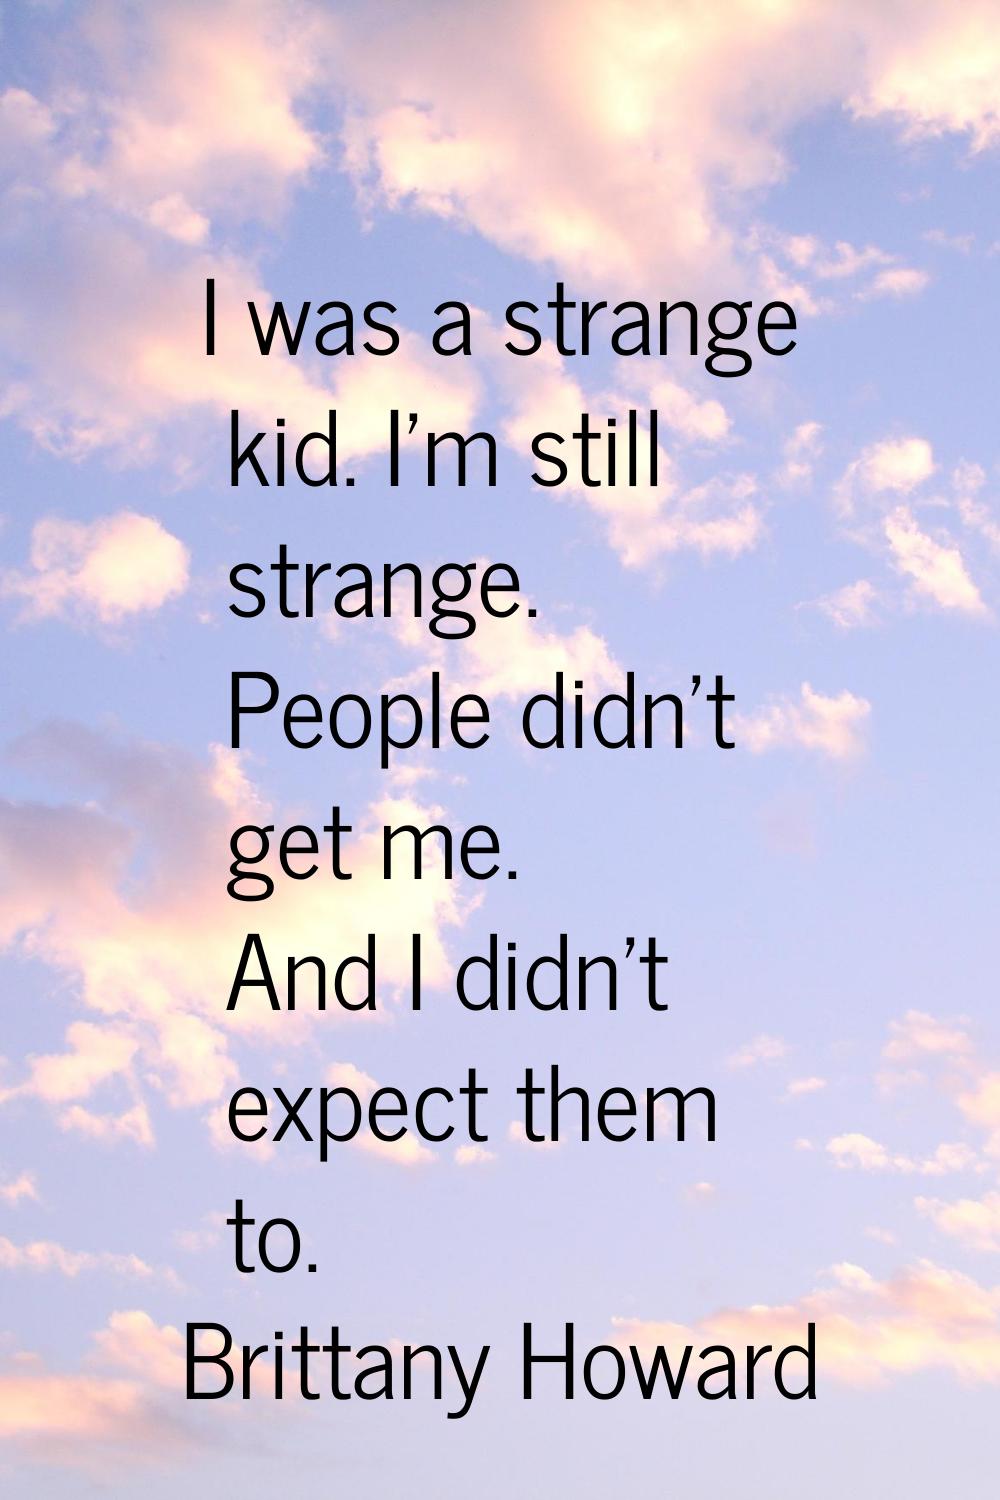 I was a strange kid. I'm still strange. People didn't get me. And I didn't expect them to.